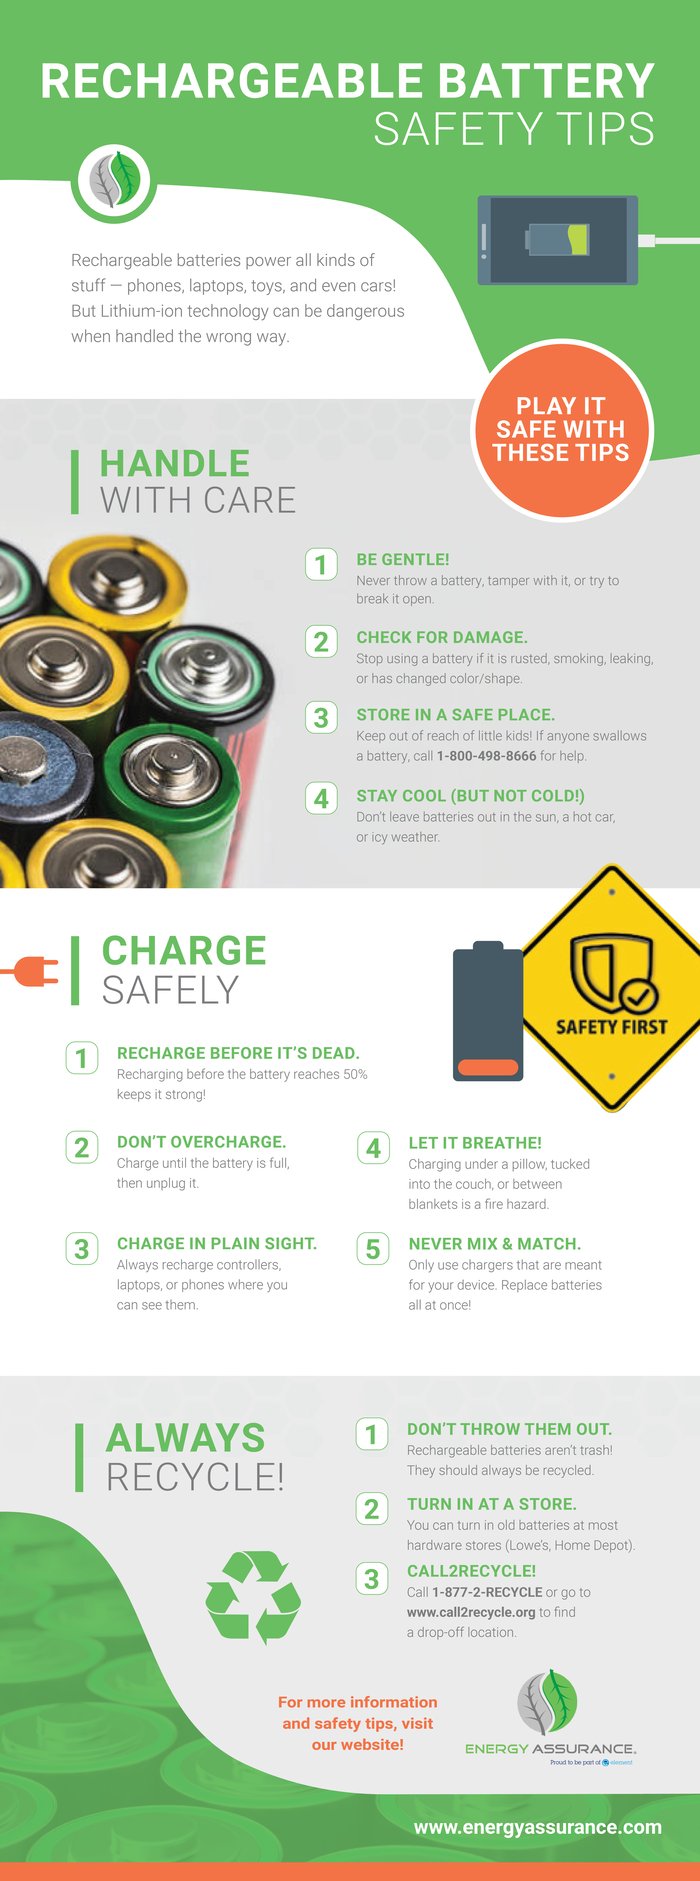 EA_BatterySafety_Infographic